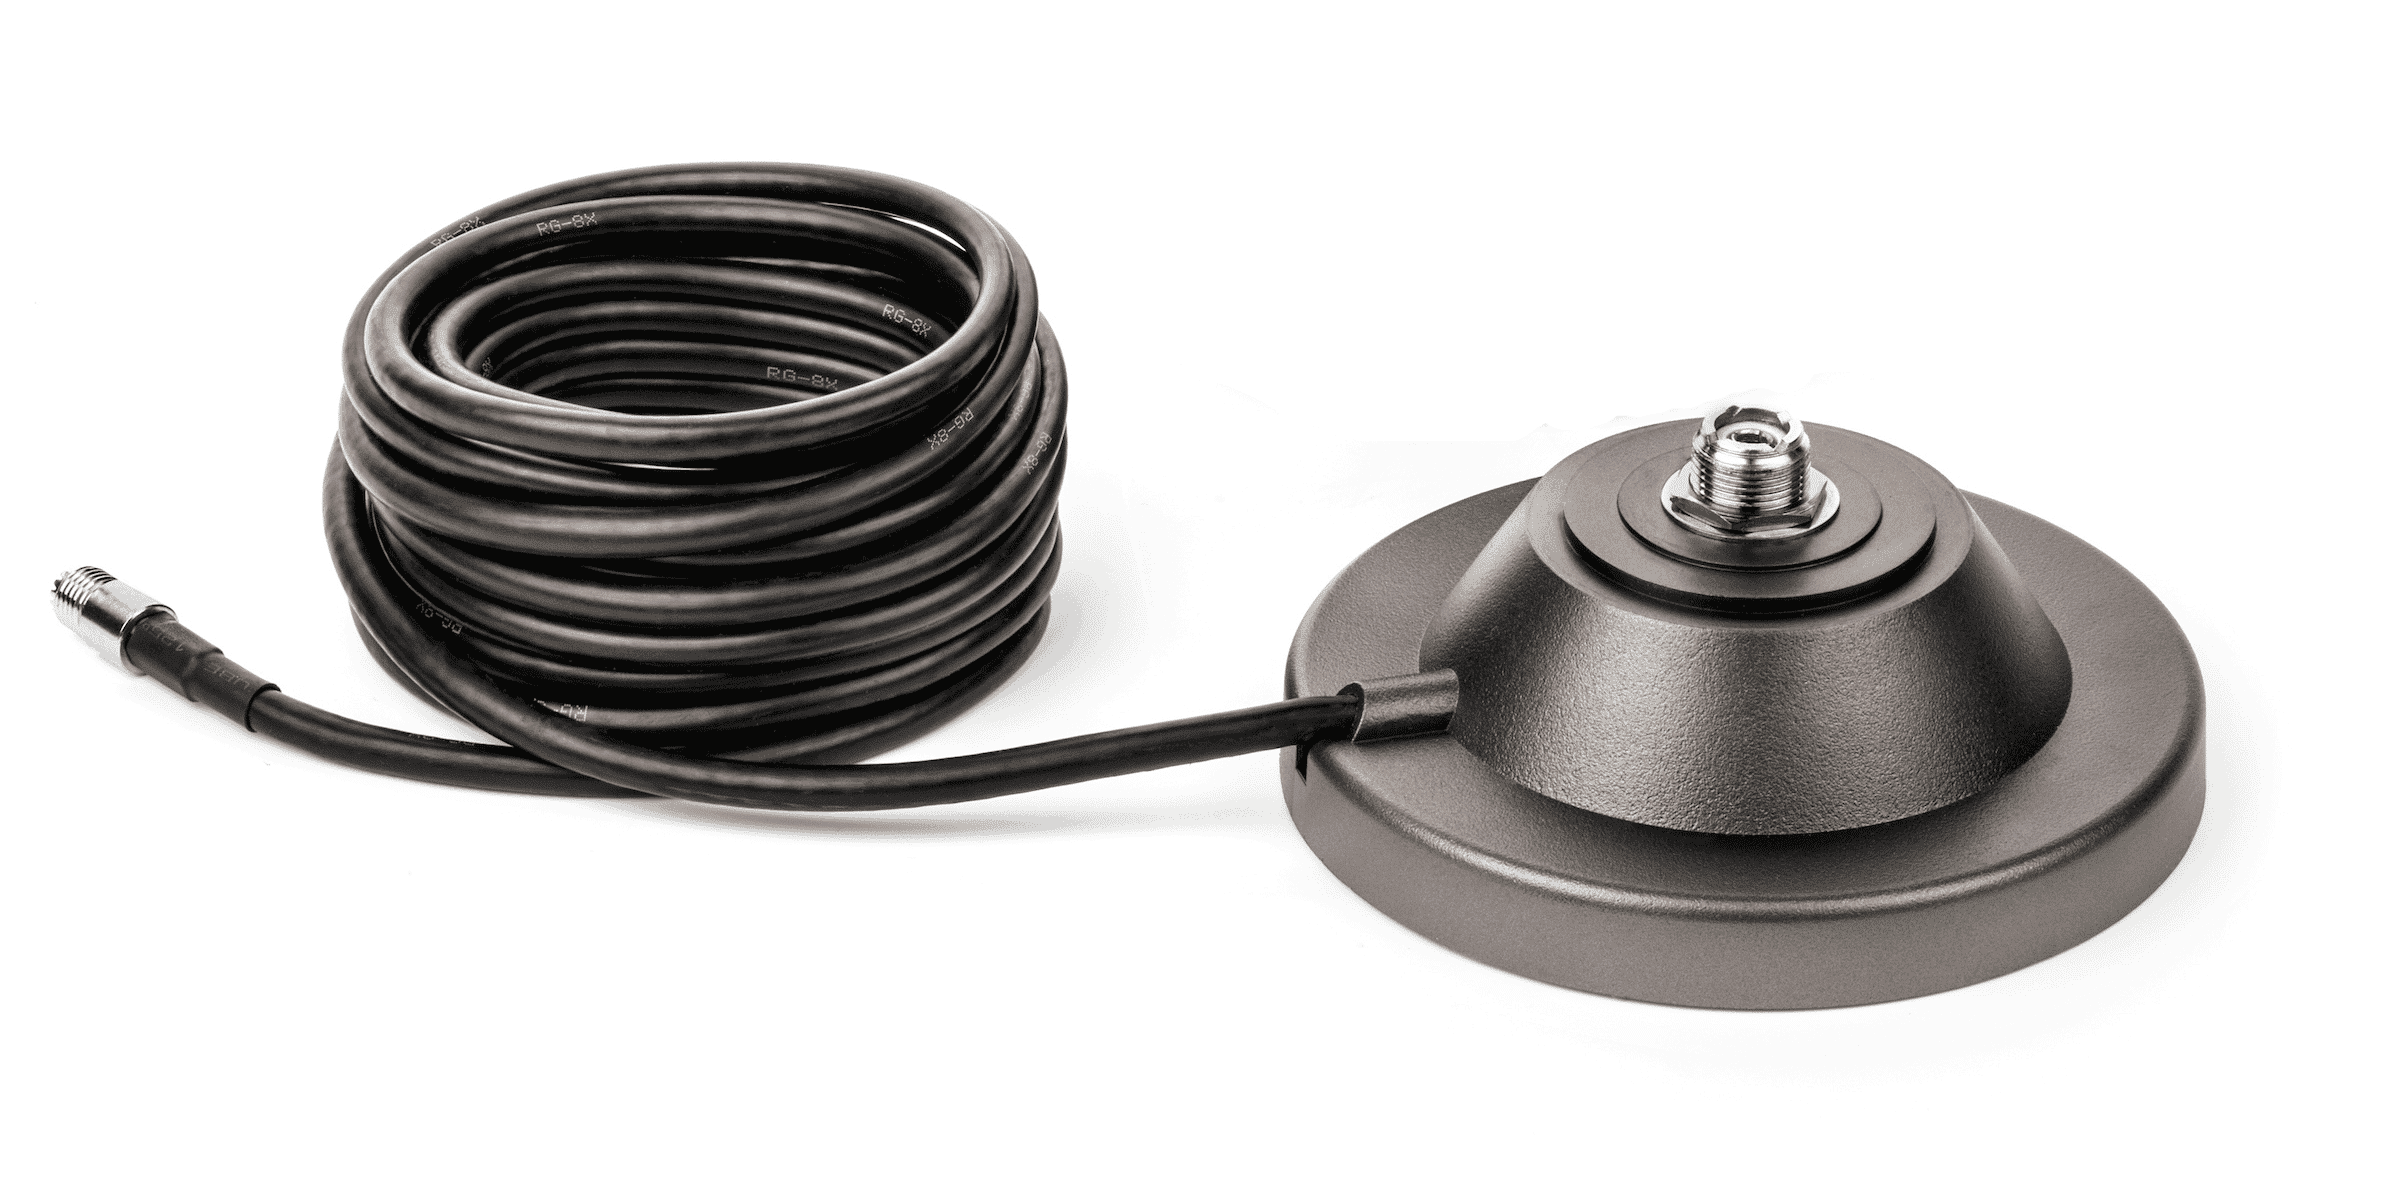 SR-A10MM Replacement Magnetic Mount & Coax Assembly from Stryker Radios